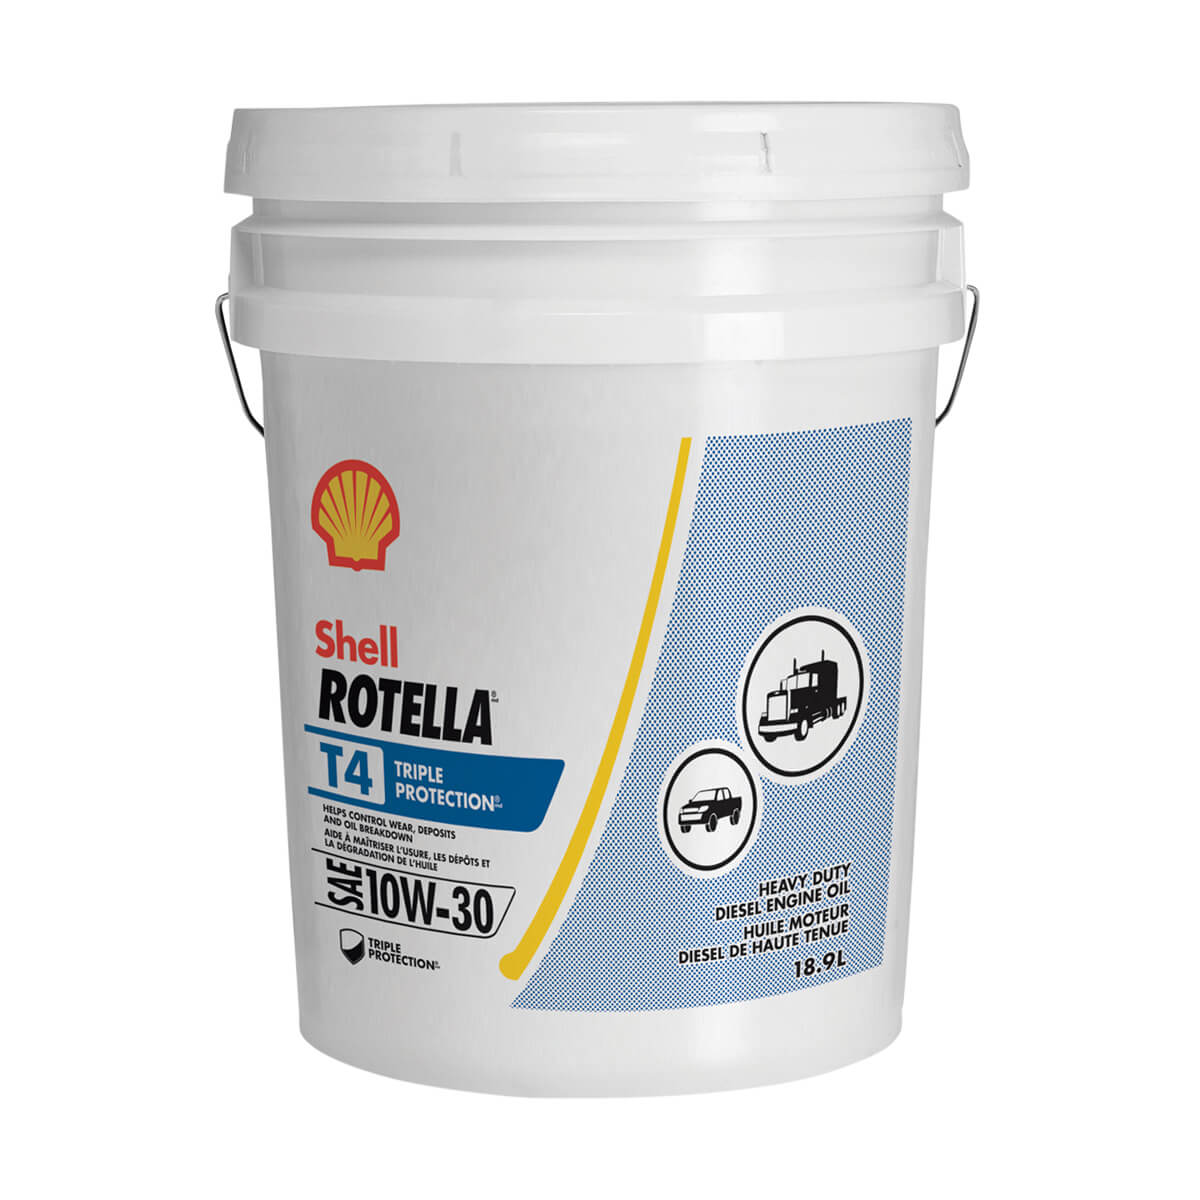 Shell Rotella T4 Triple Protection 10W-30 - 18.9 L